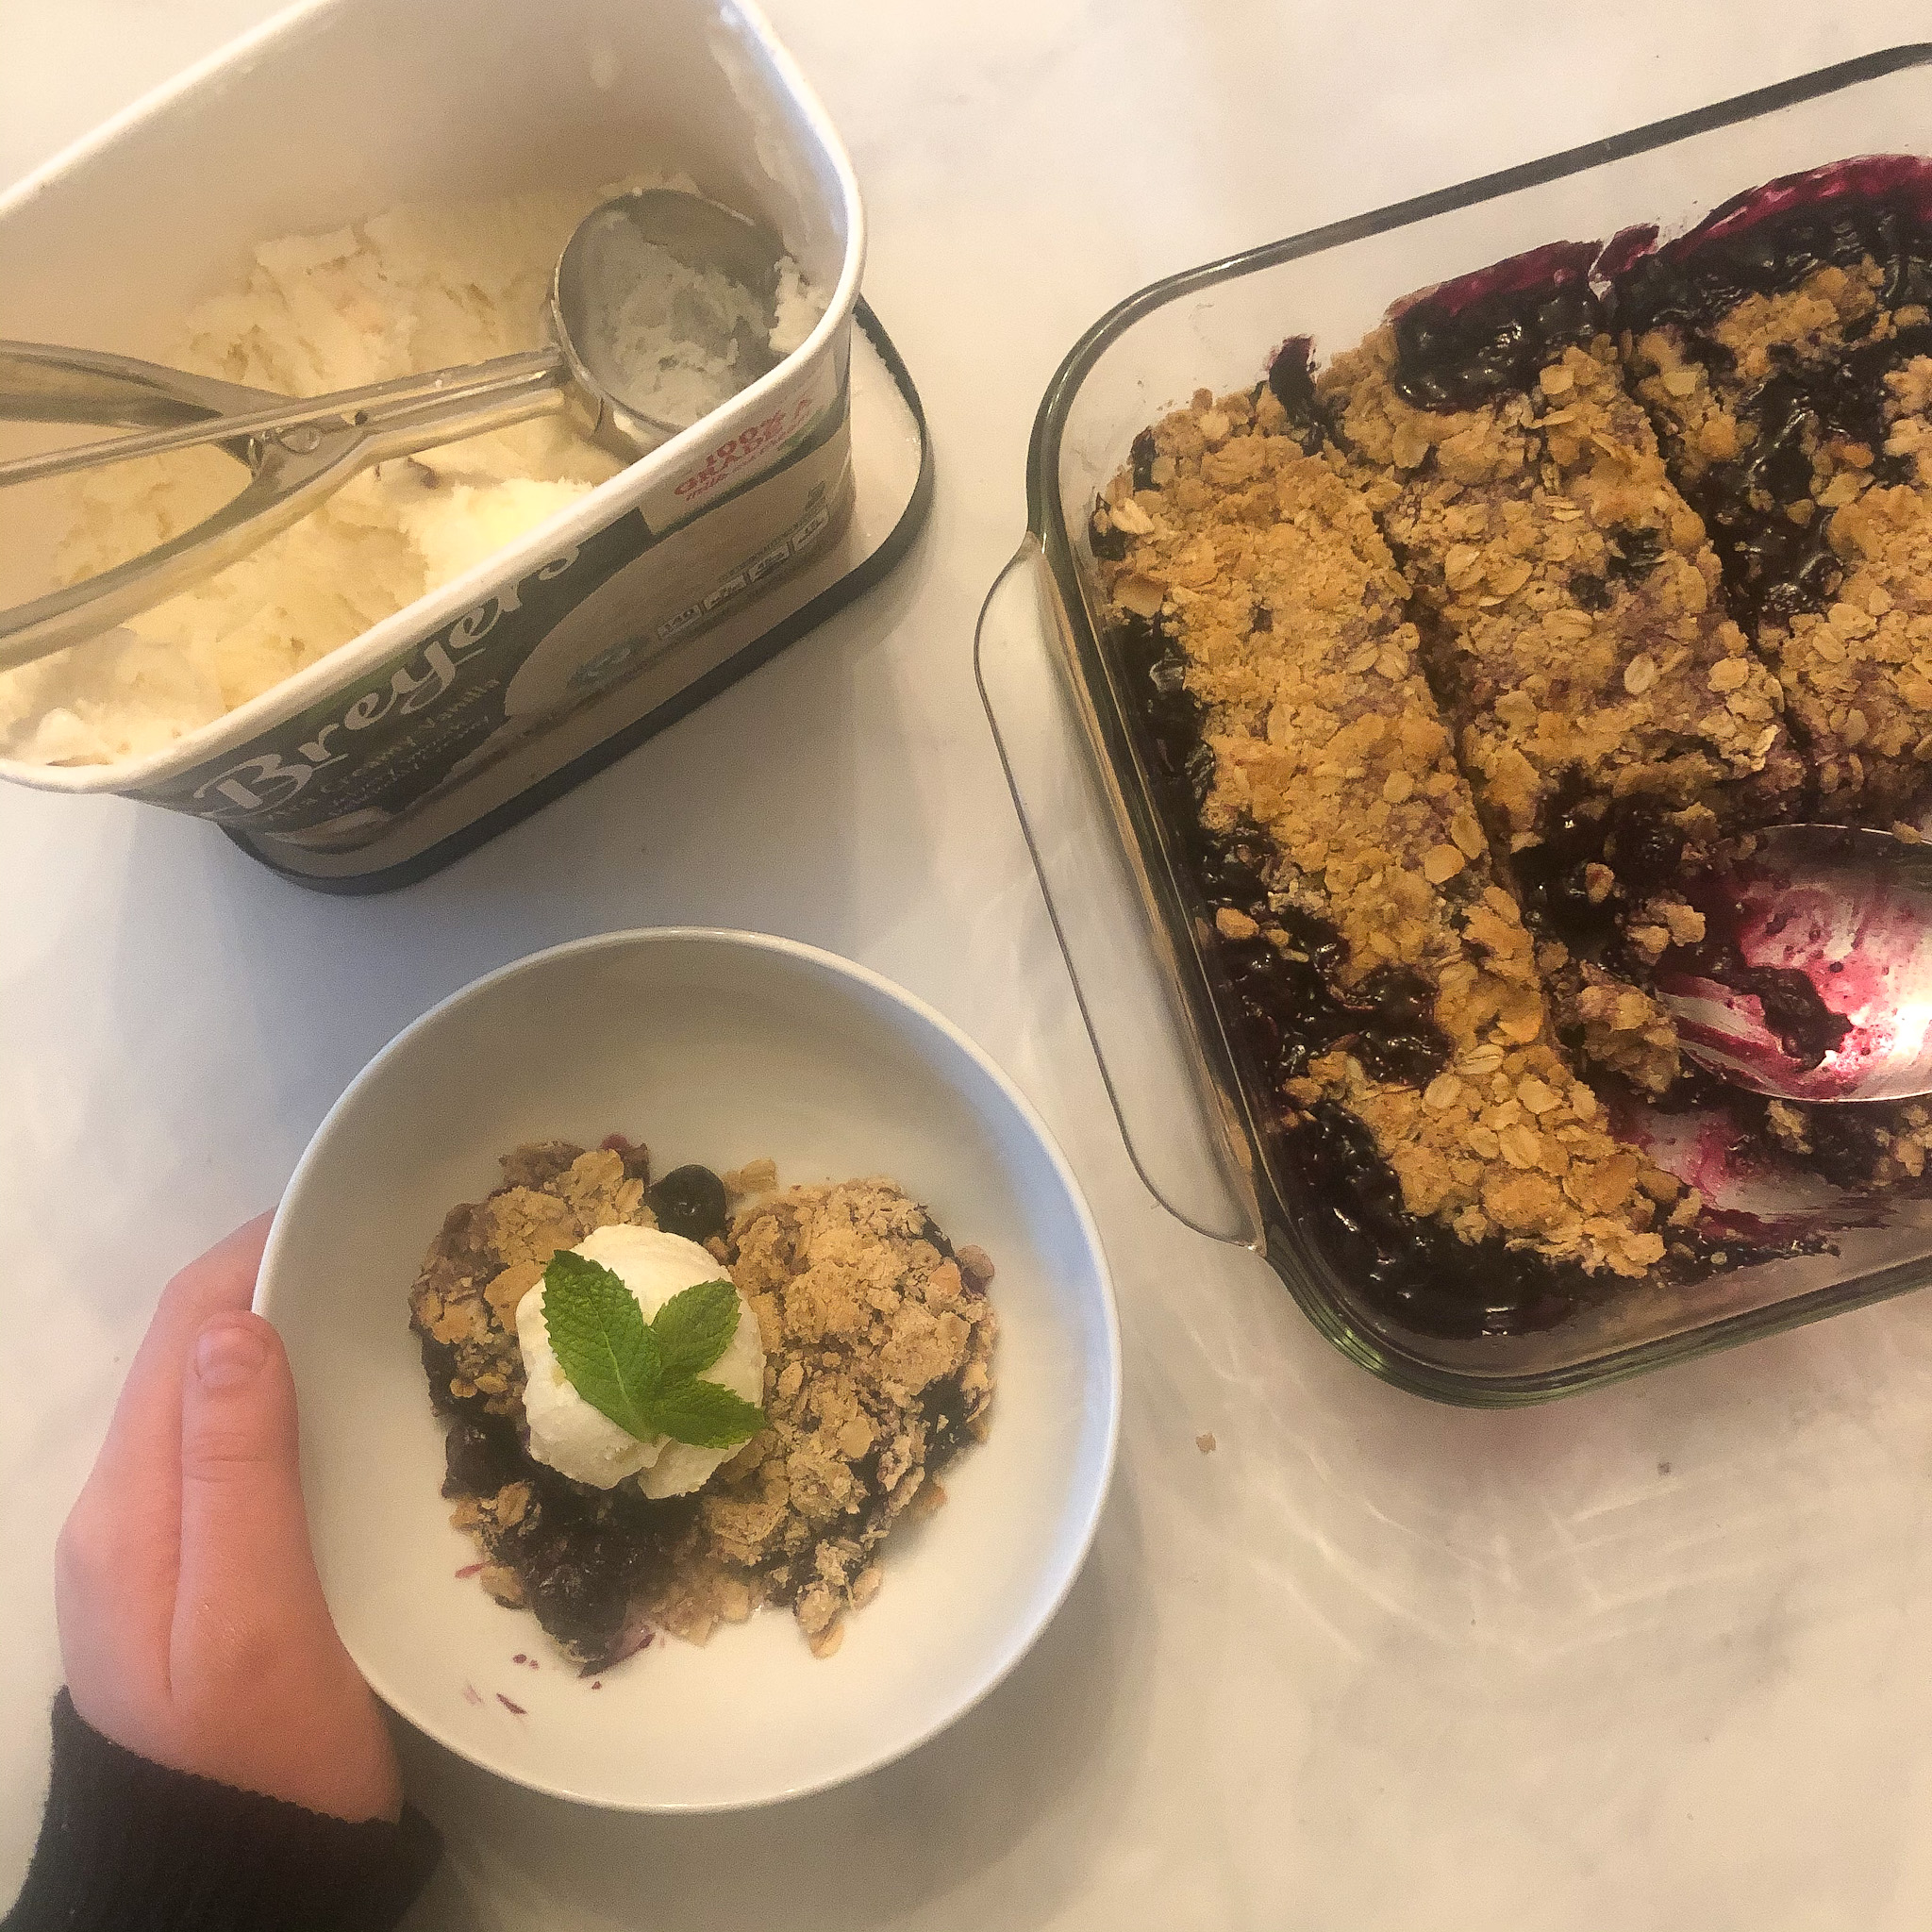 finished blueberry and oat gluten free crumble